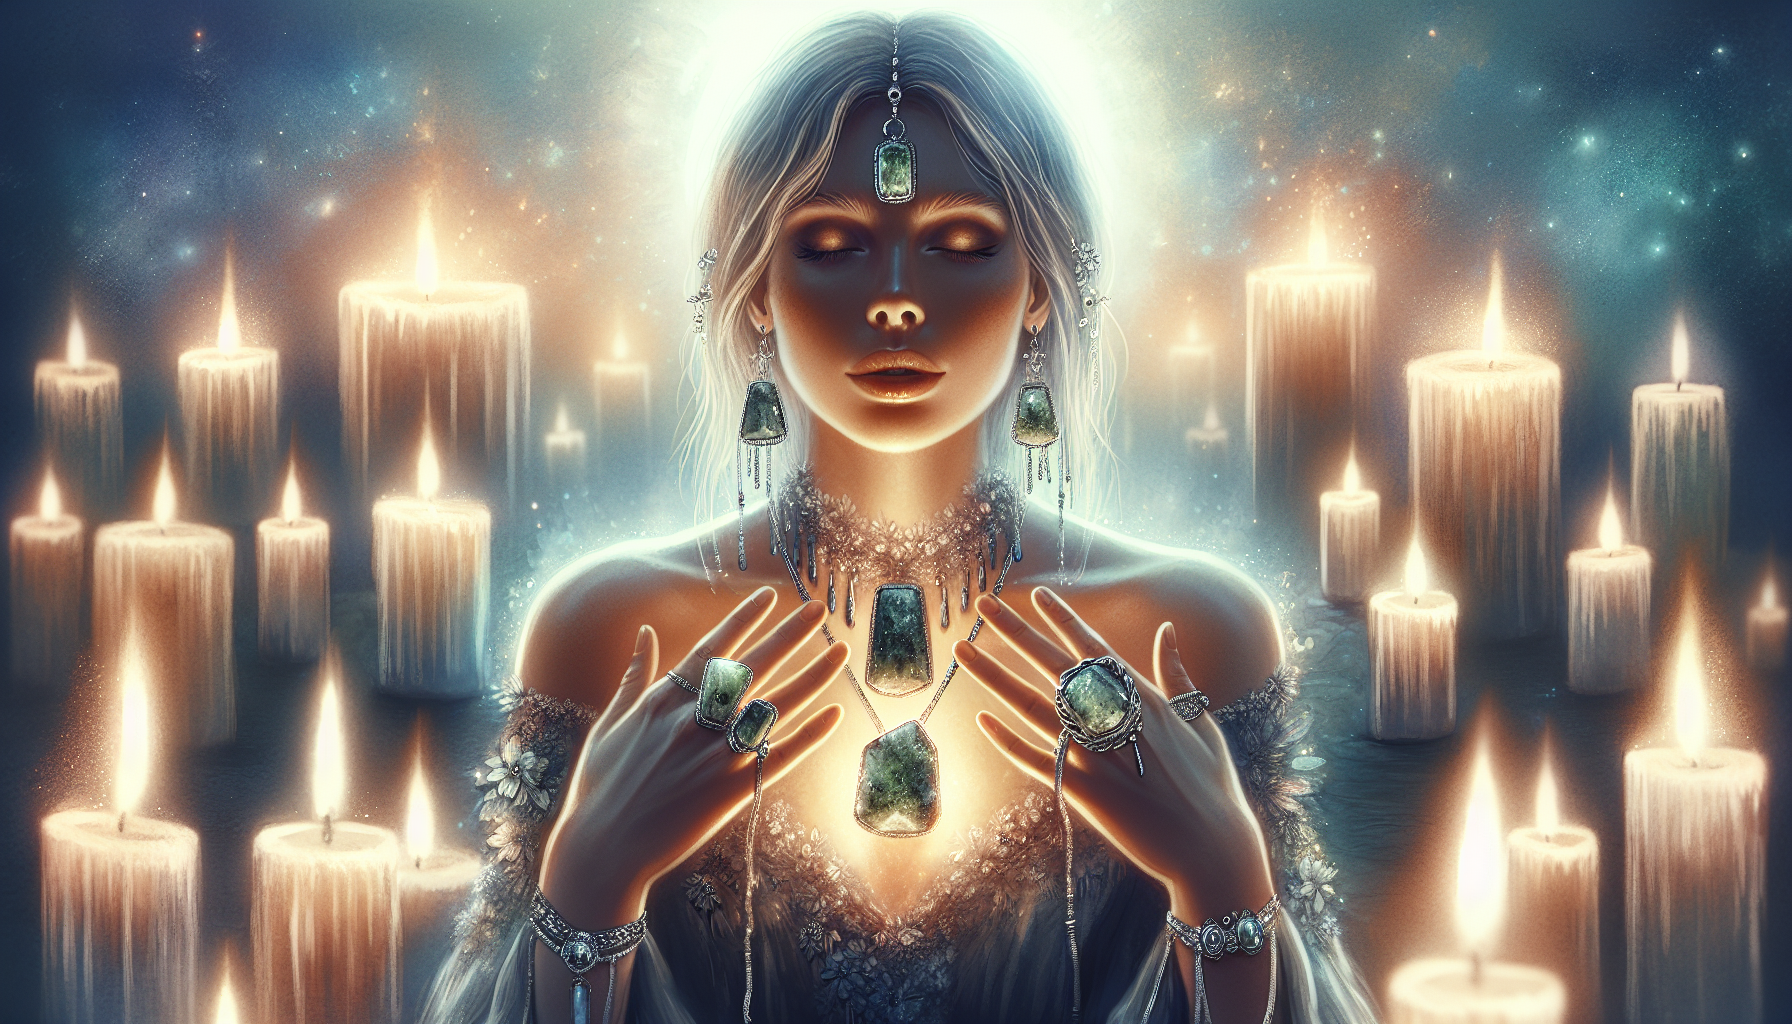 Illustration of a person wearing moldavite jewelry and meditating in a serene environment